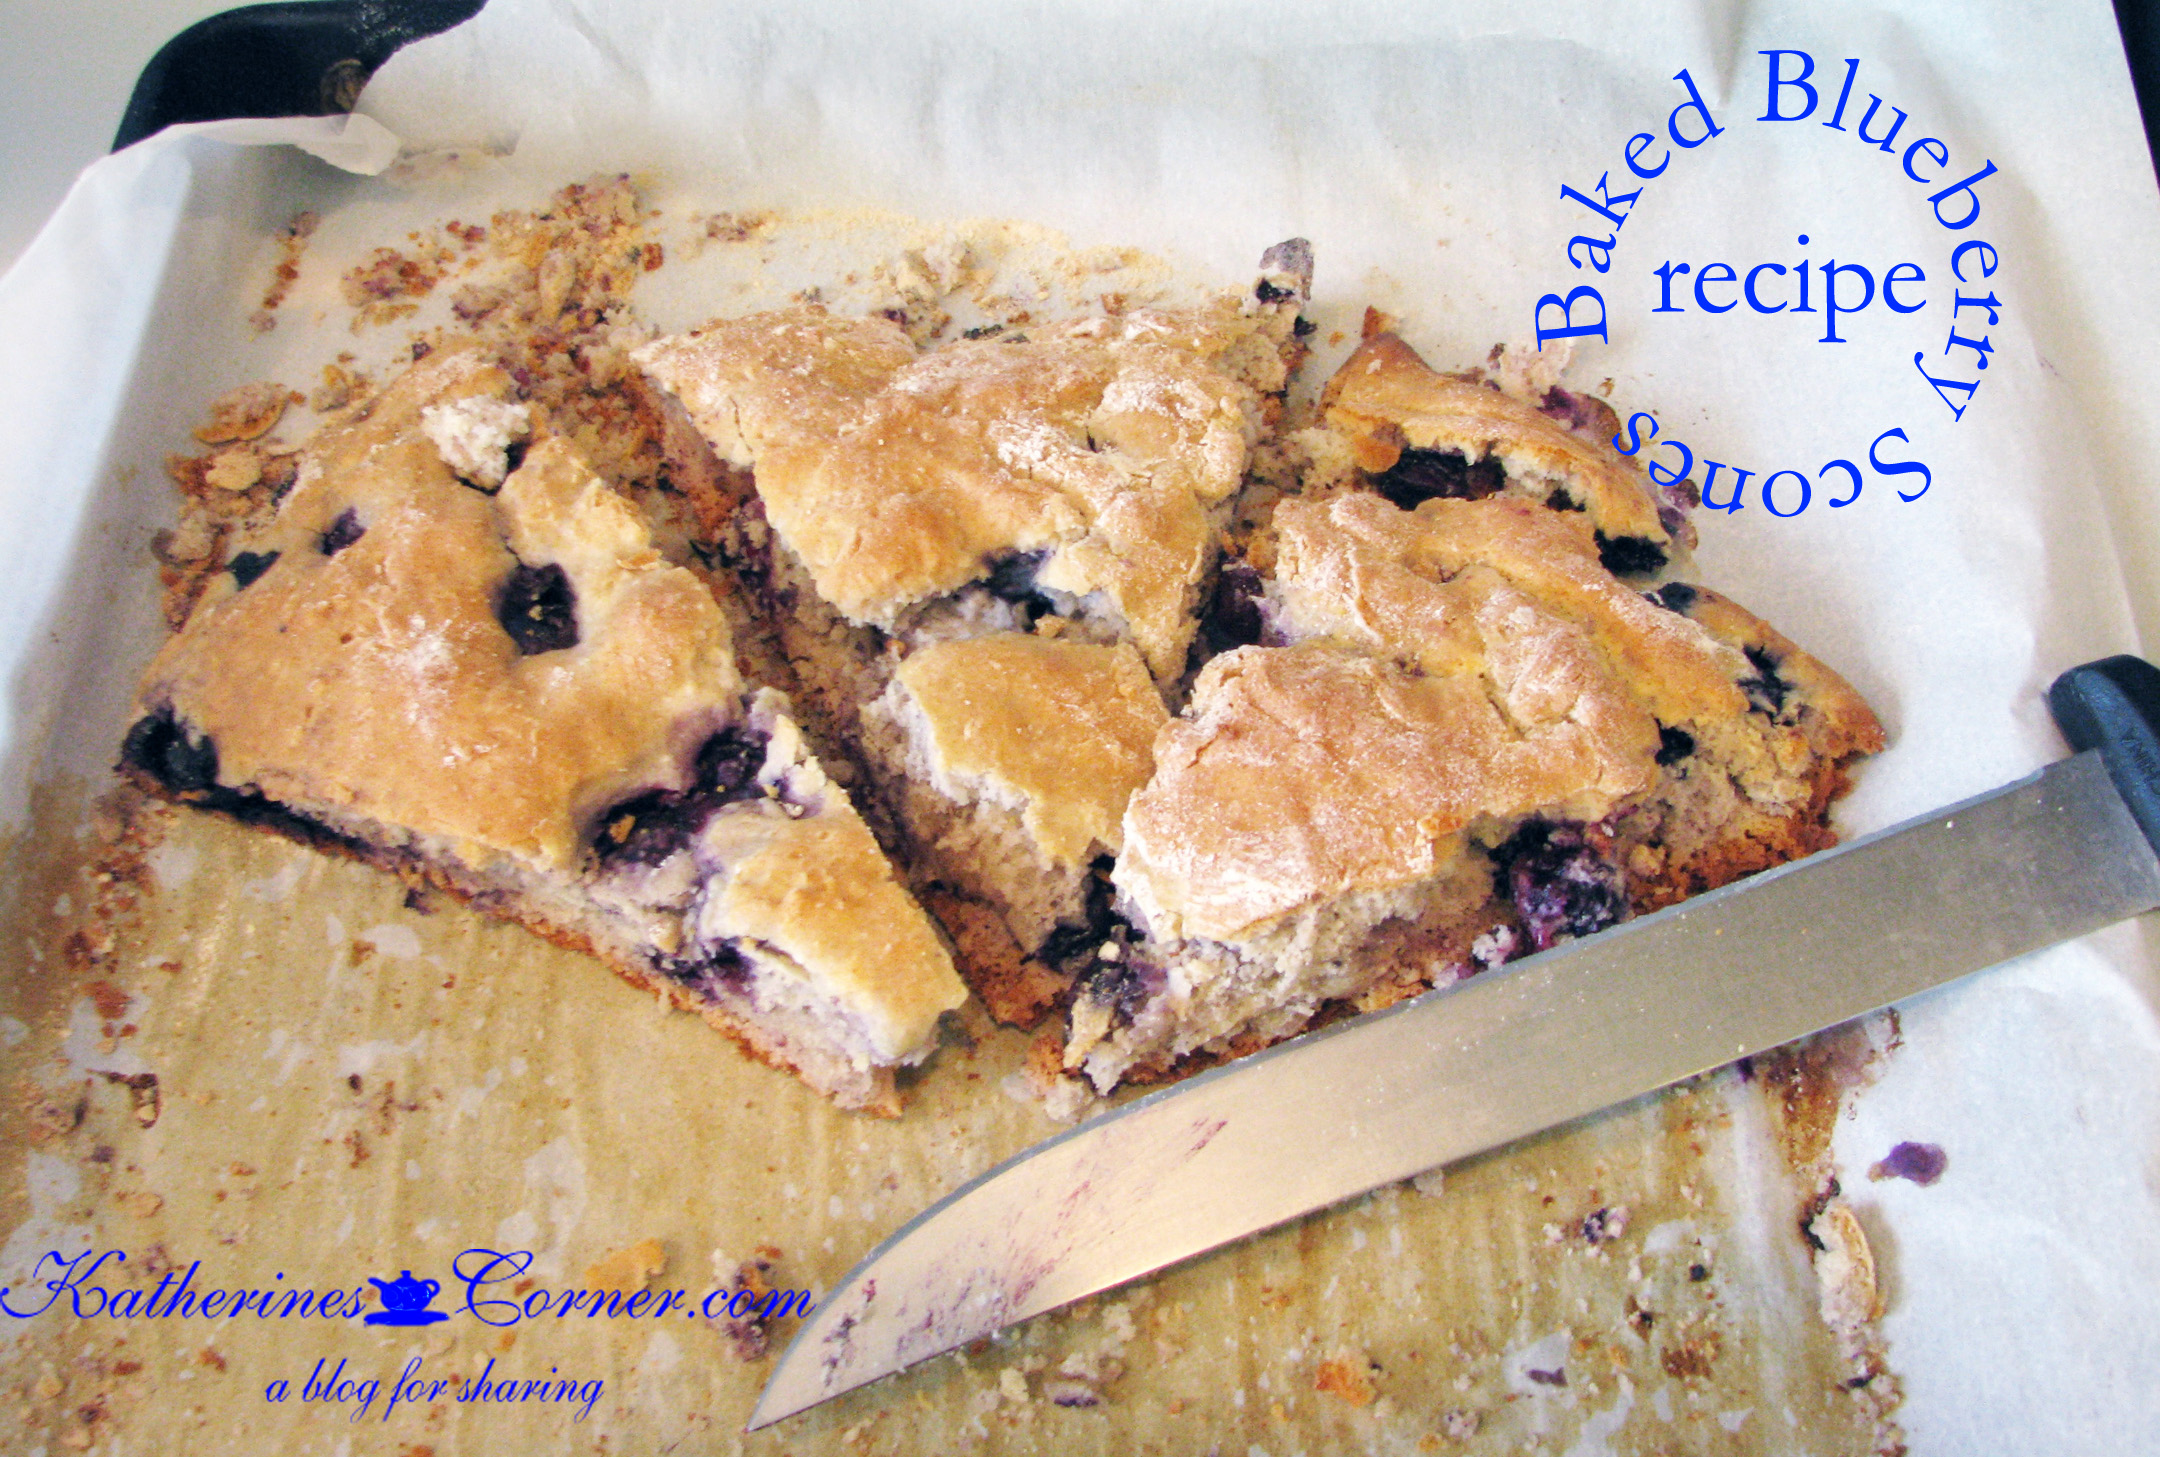 Baked Blueberry Scones